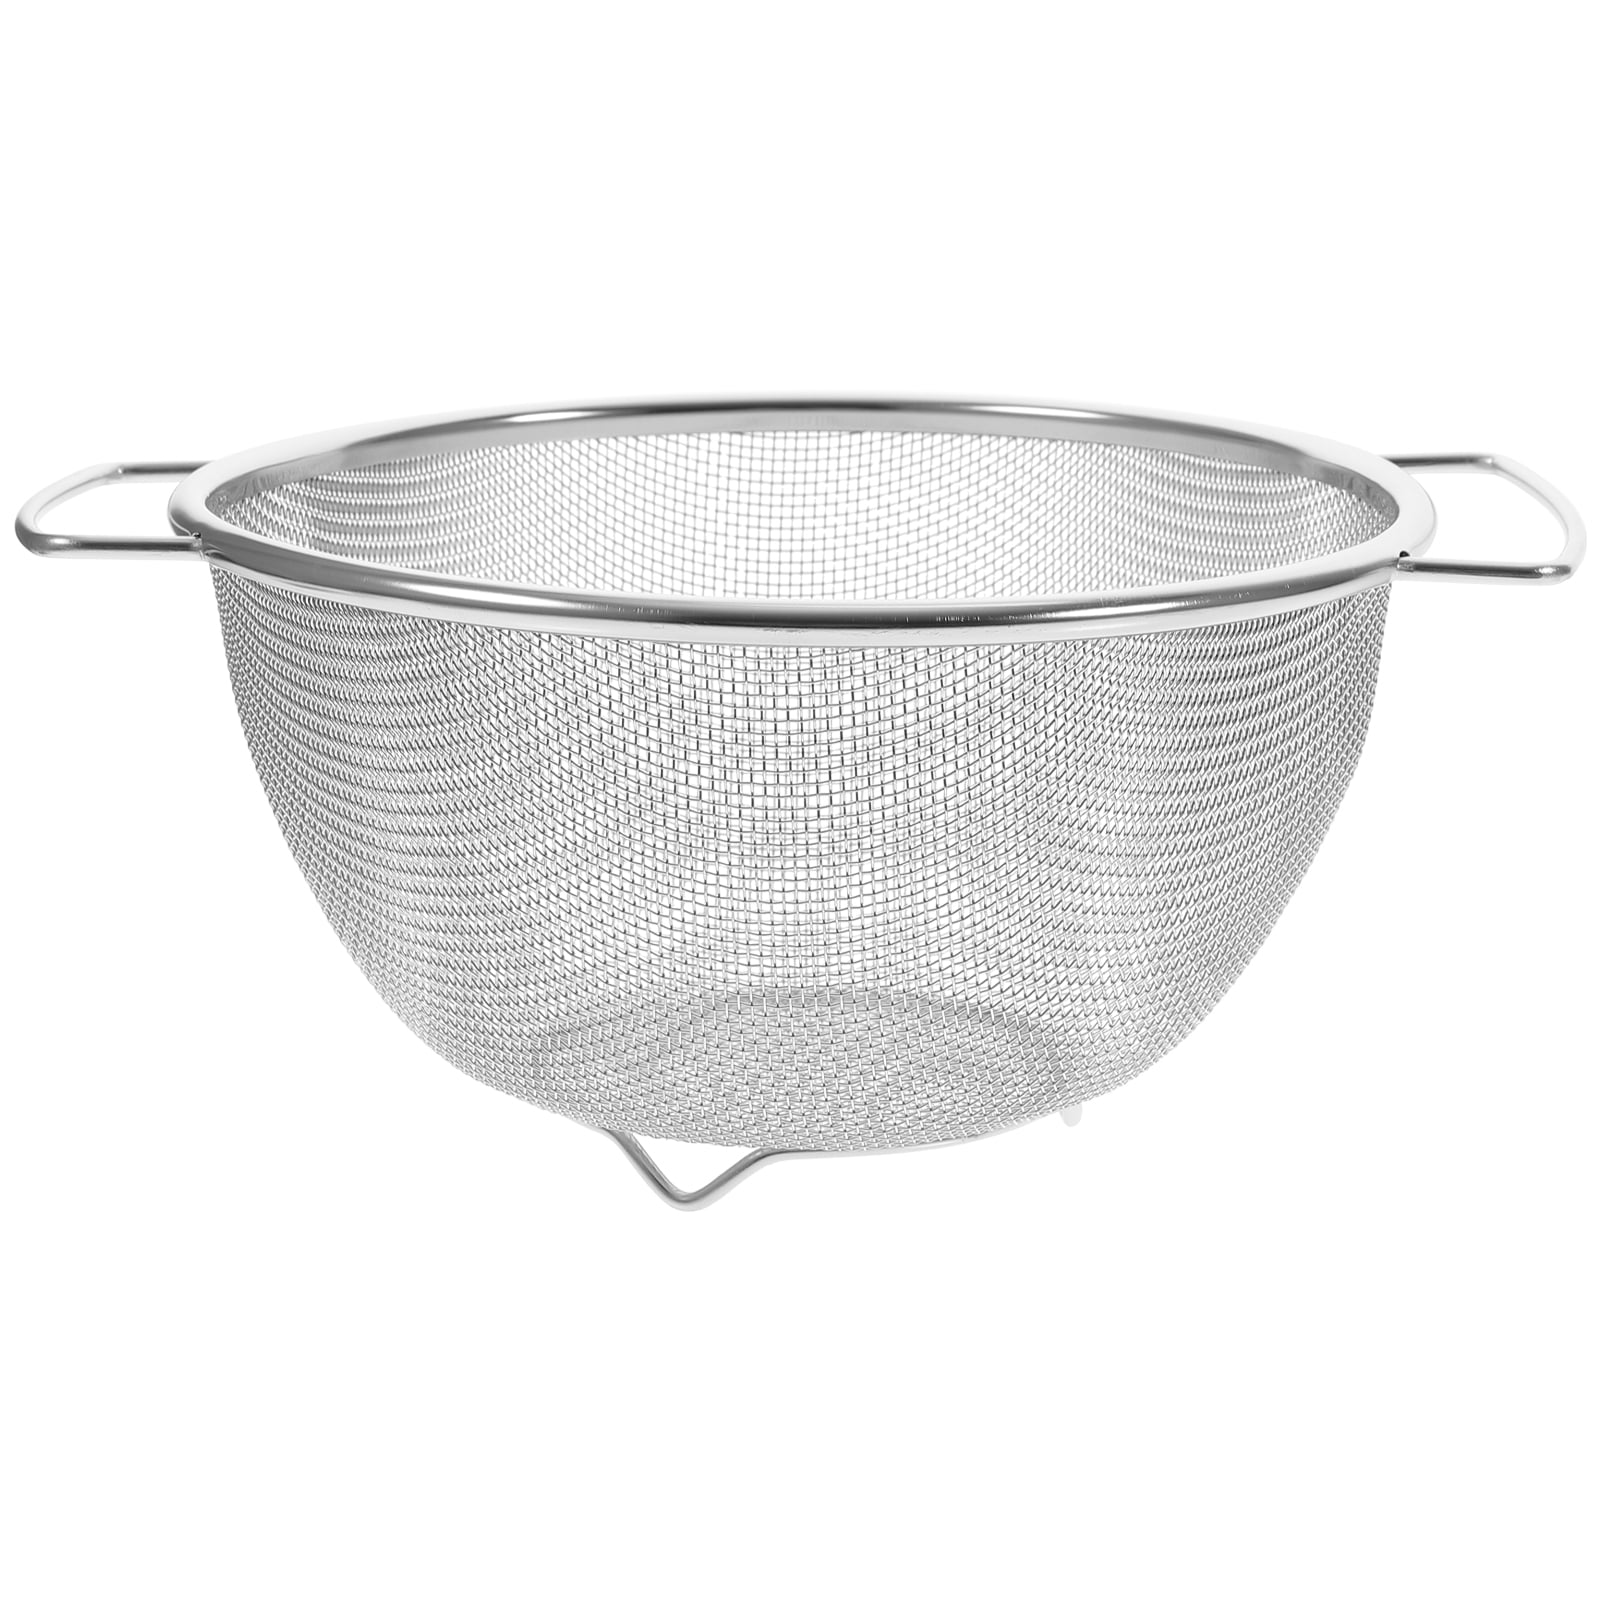 Sanwood Stainless Steel Holes Washing Rice Sieve Strainer Fruits Vegetable Drain Bowl,24cm,Kitchen Tool, Size: 24 cm, Silver